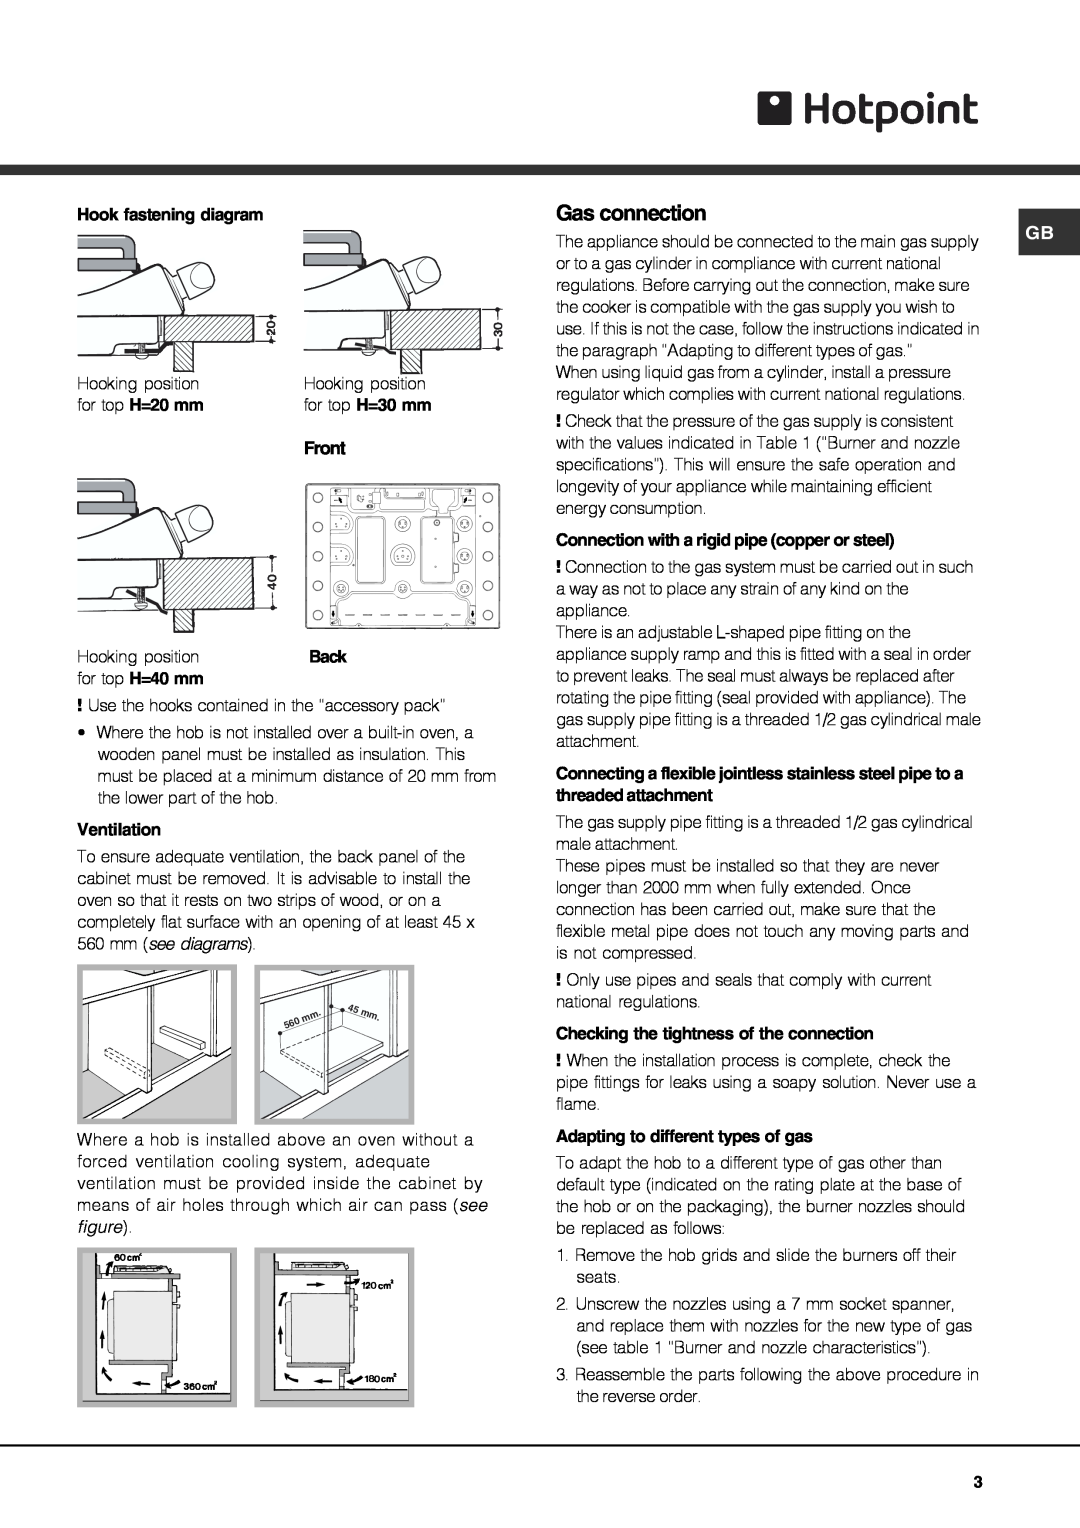 Hotpoint G760 Hook fastening diagram, Front, Ventilation, mm see diagrams, Connection with a rigid pipe copper or steel 